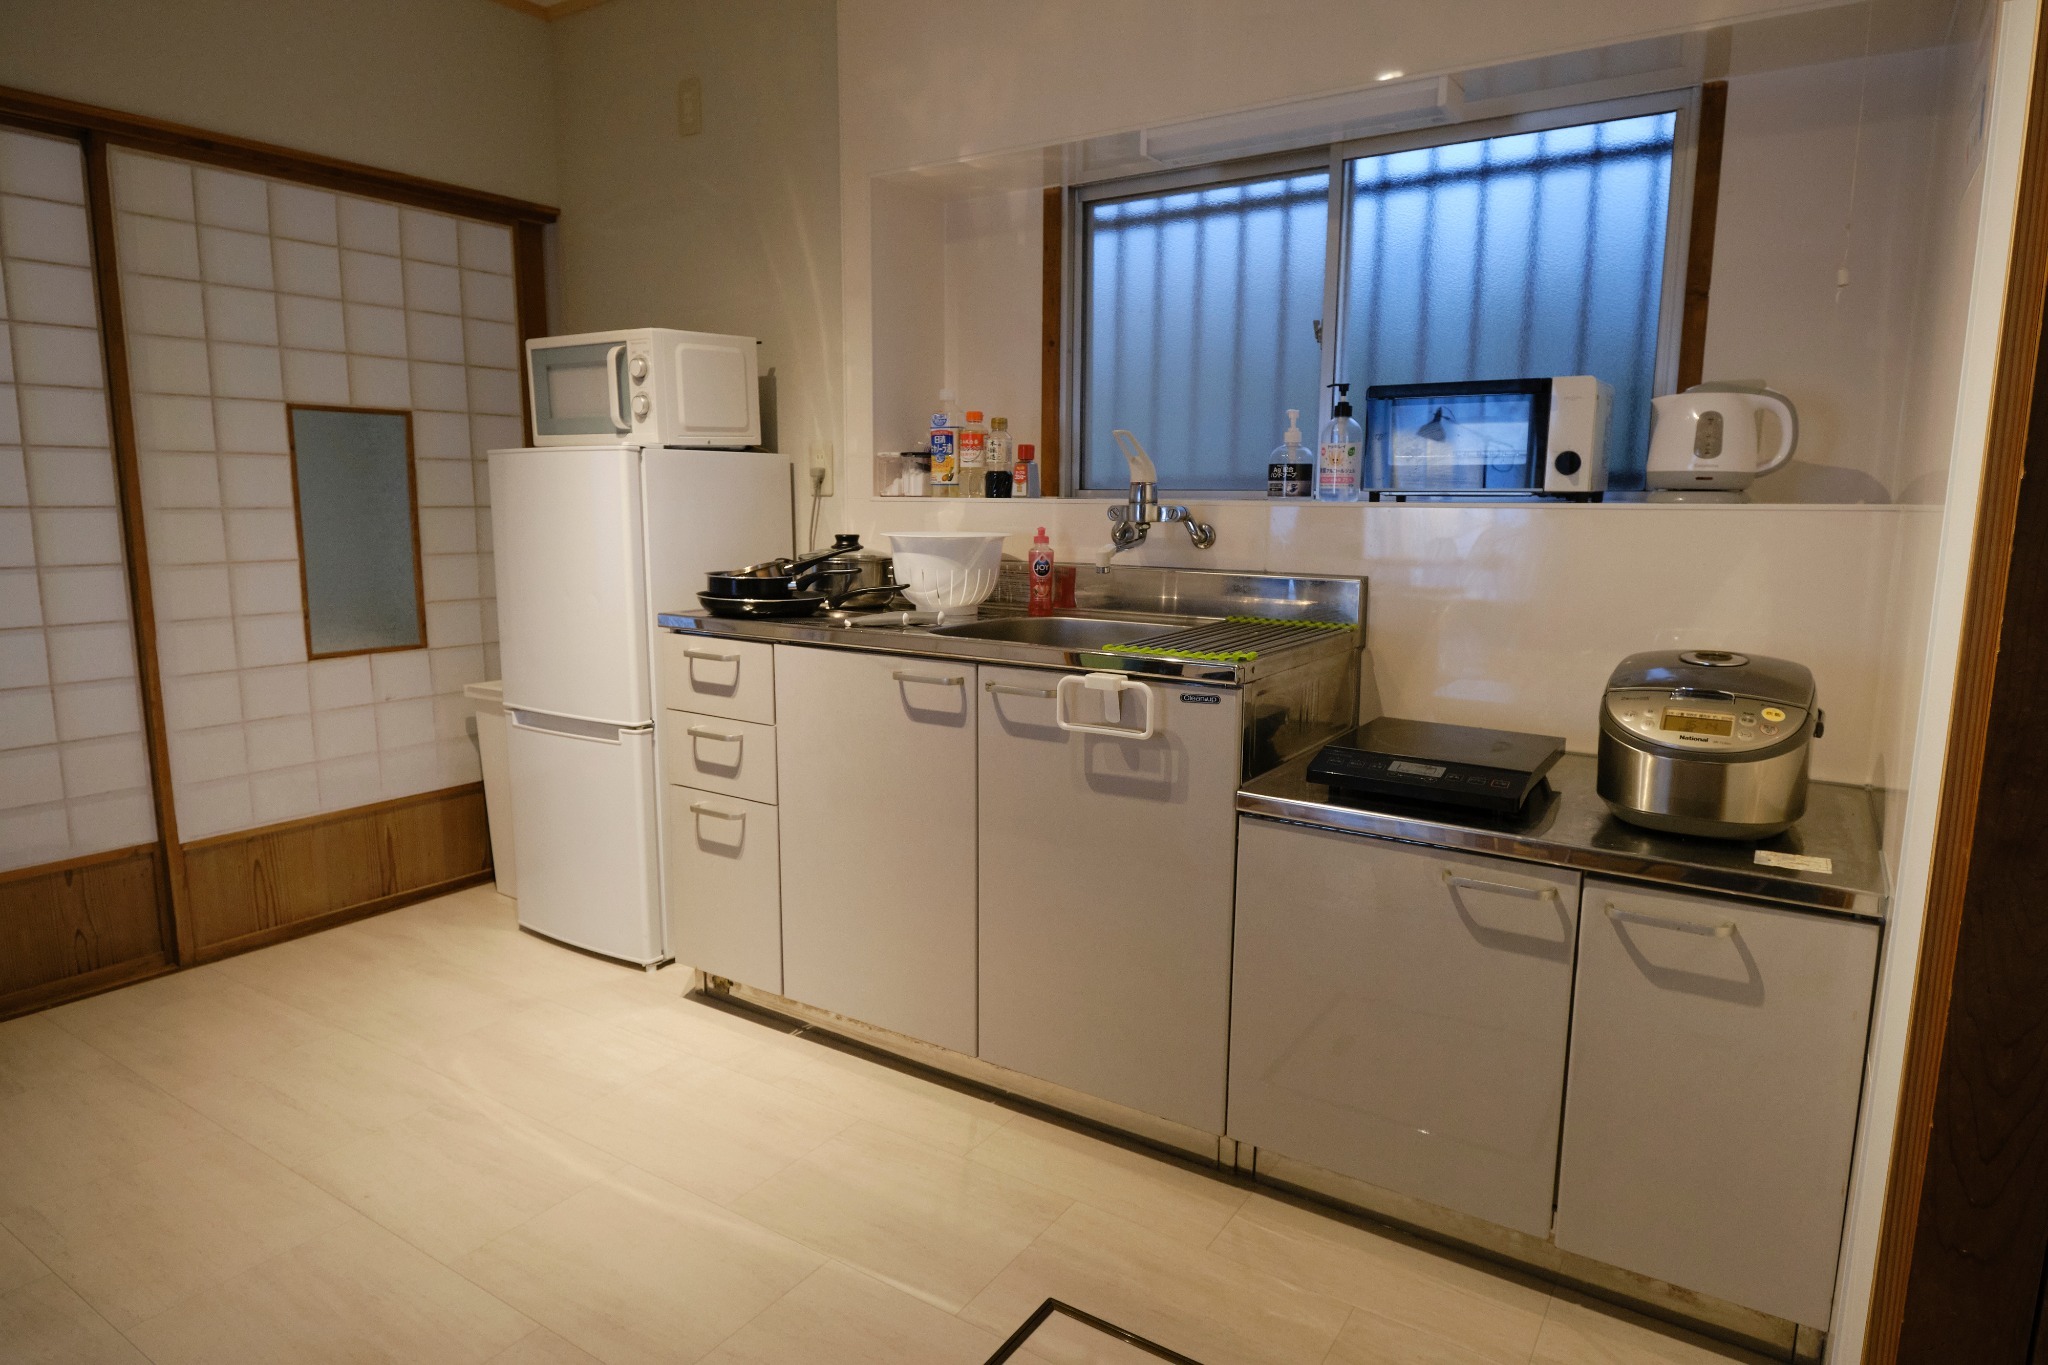 There is a microwave, a refrigerator, a toaster oven and an IH stove in house. 電子レンジ、冷蔵庫、オーブントースターとIHコンロがあります。